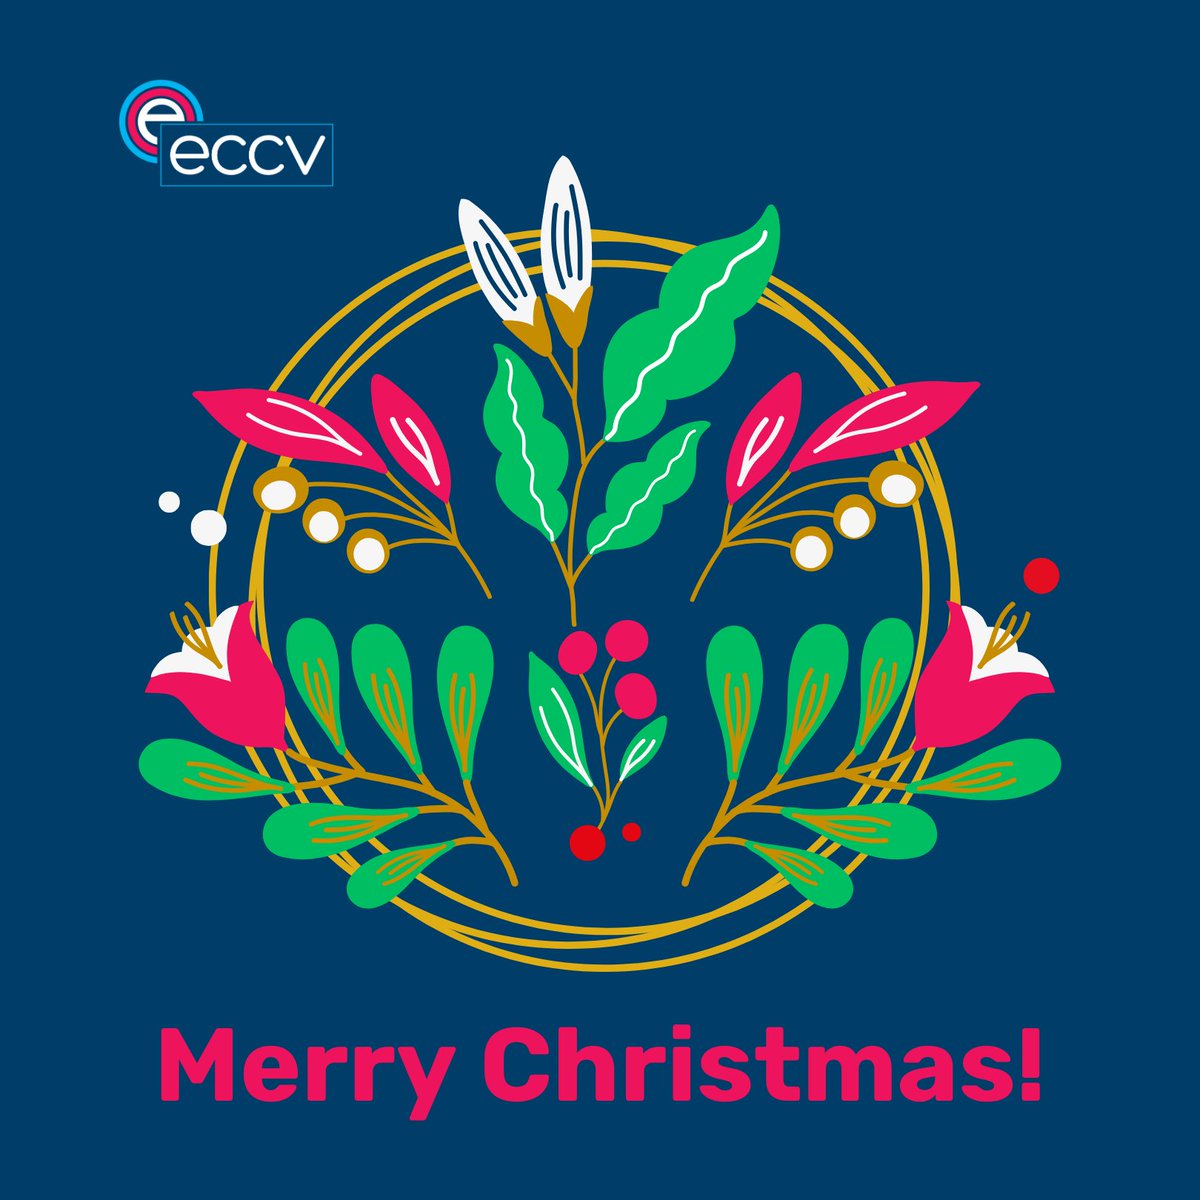 Merry Christmas to all who celebrate! ECCV wishes you and your loved ones a day filled with joy and laughter ❤️🌟🎄